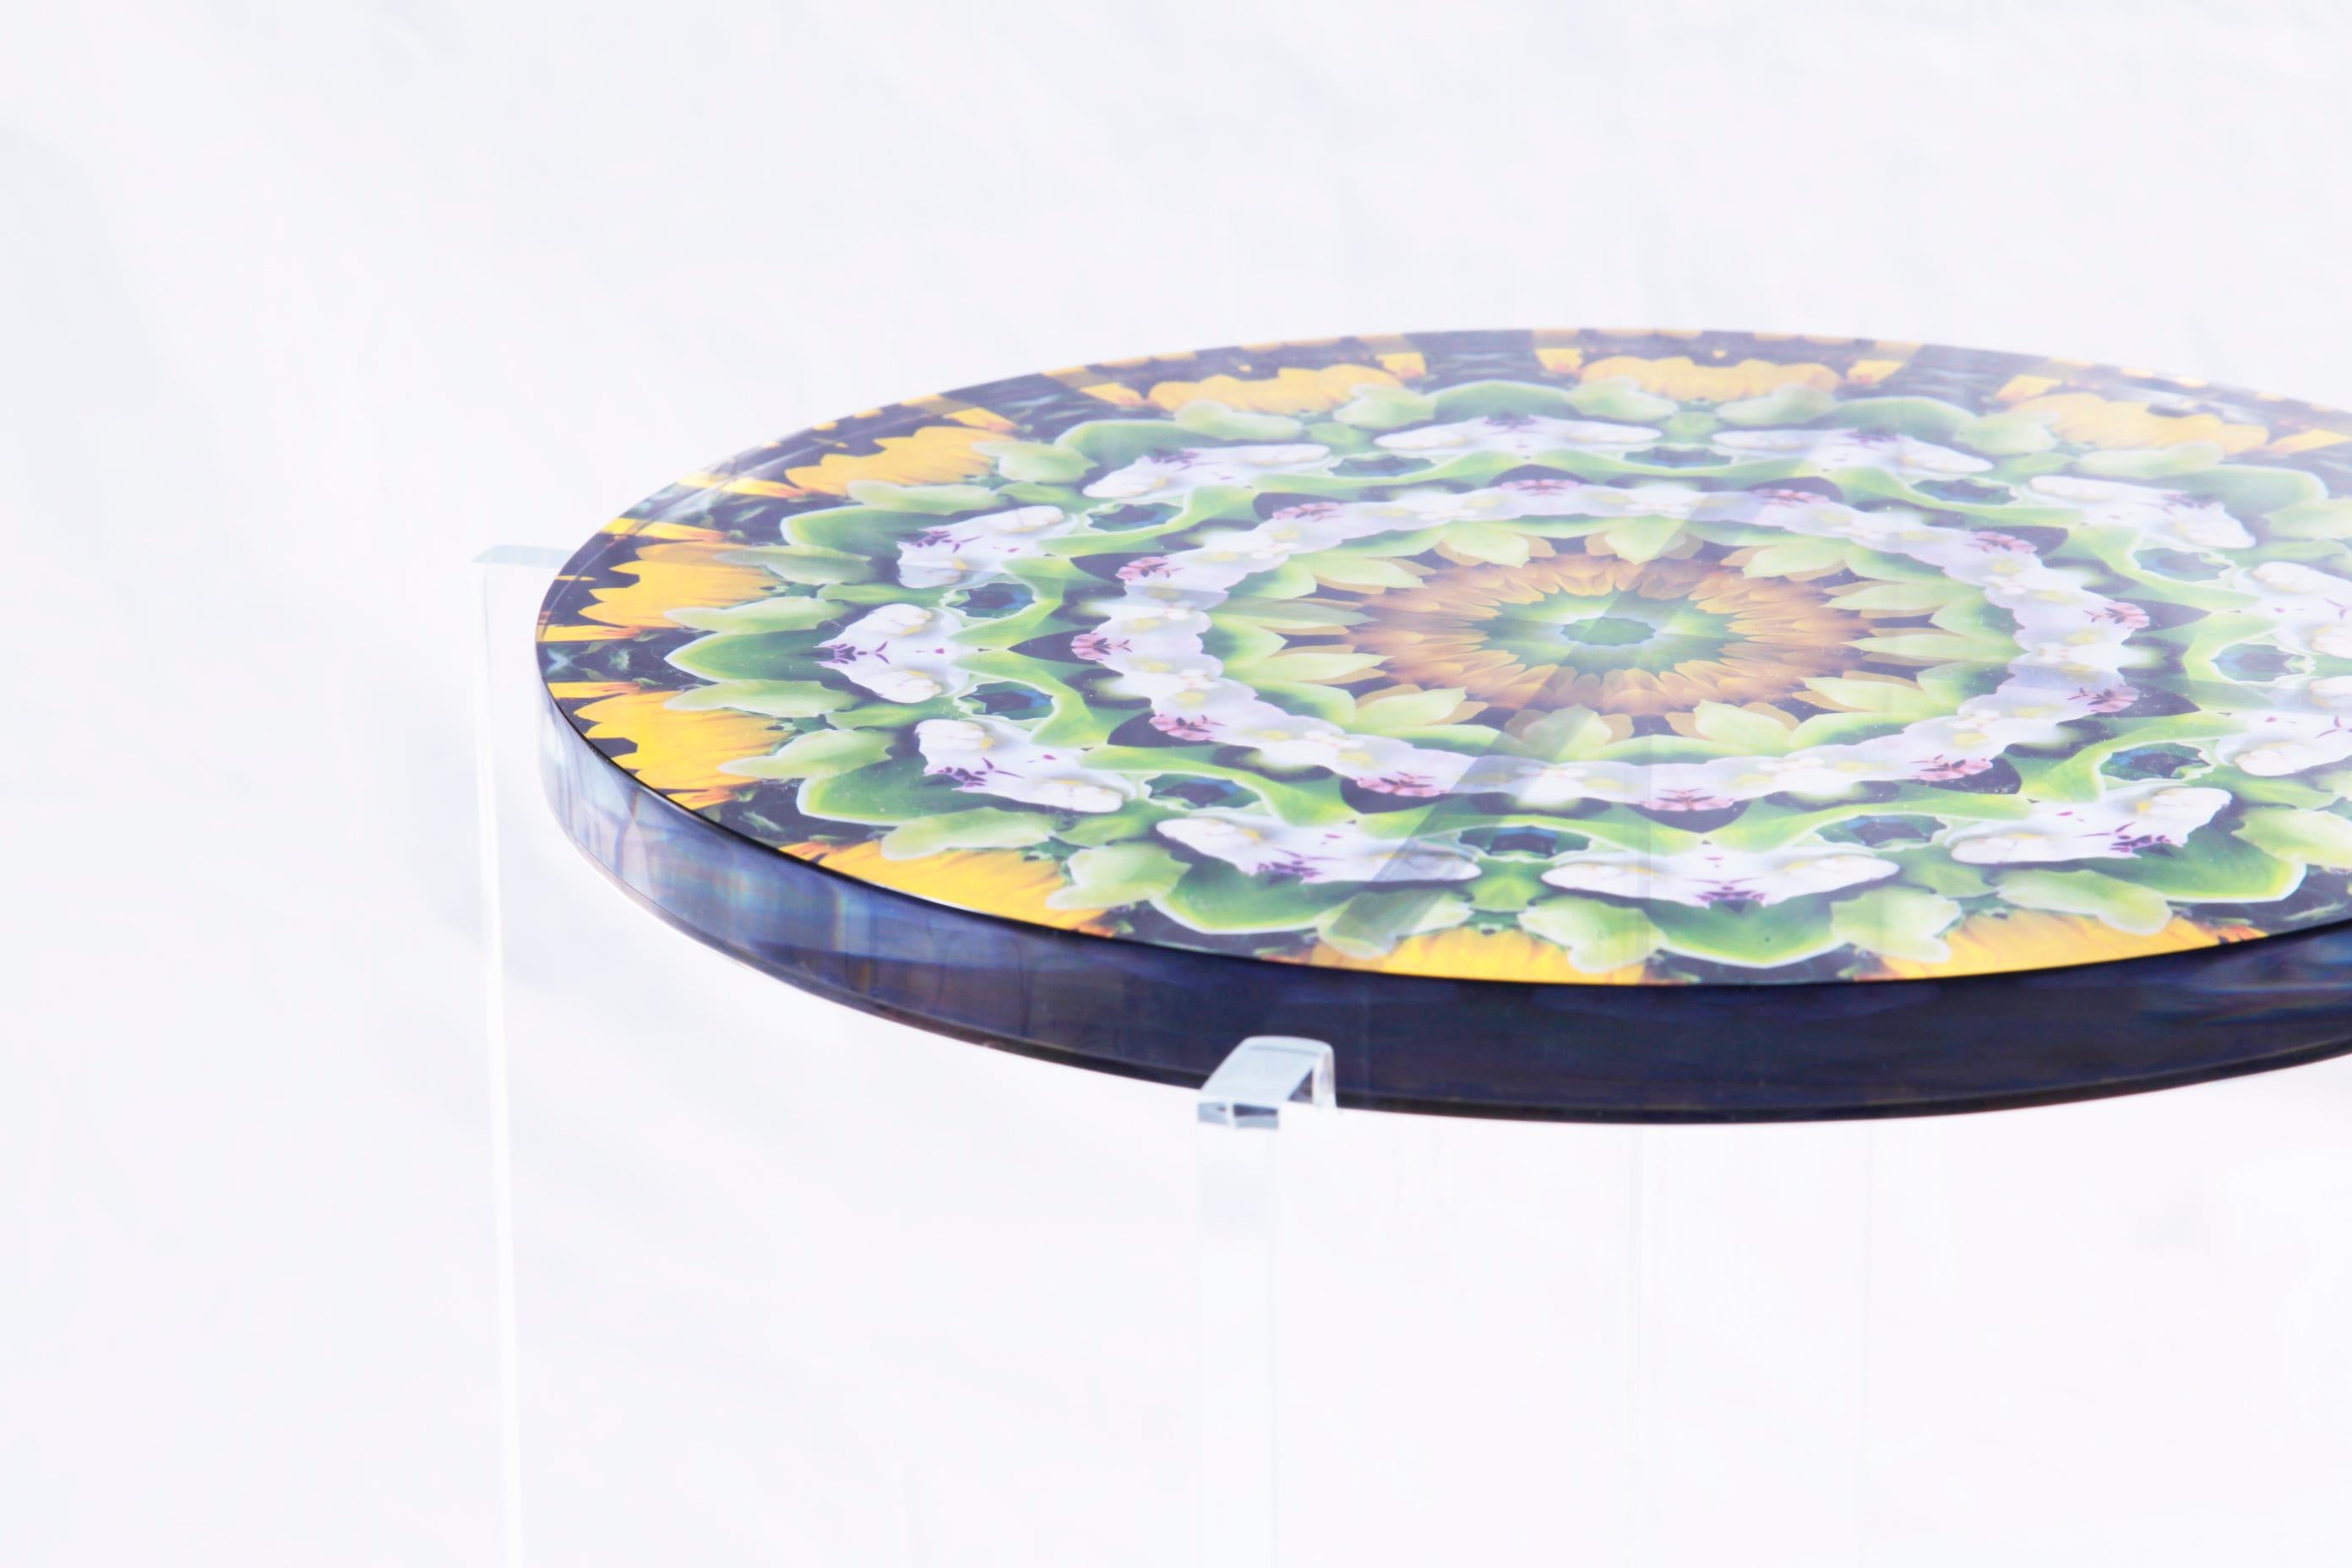 Mandala ‘bouquet tables’ bring a burst of colour & spiritual optimism. Designed by luxury lifestyle brand JG Home, these unique bouquet mandala tables flood any urban setting with a burst of floral vibrancy. 
Made from high quality PVC, the modern